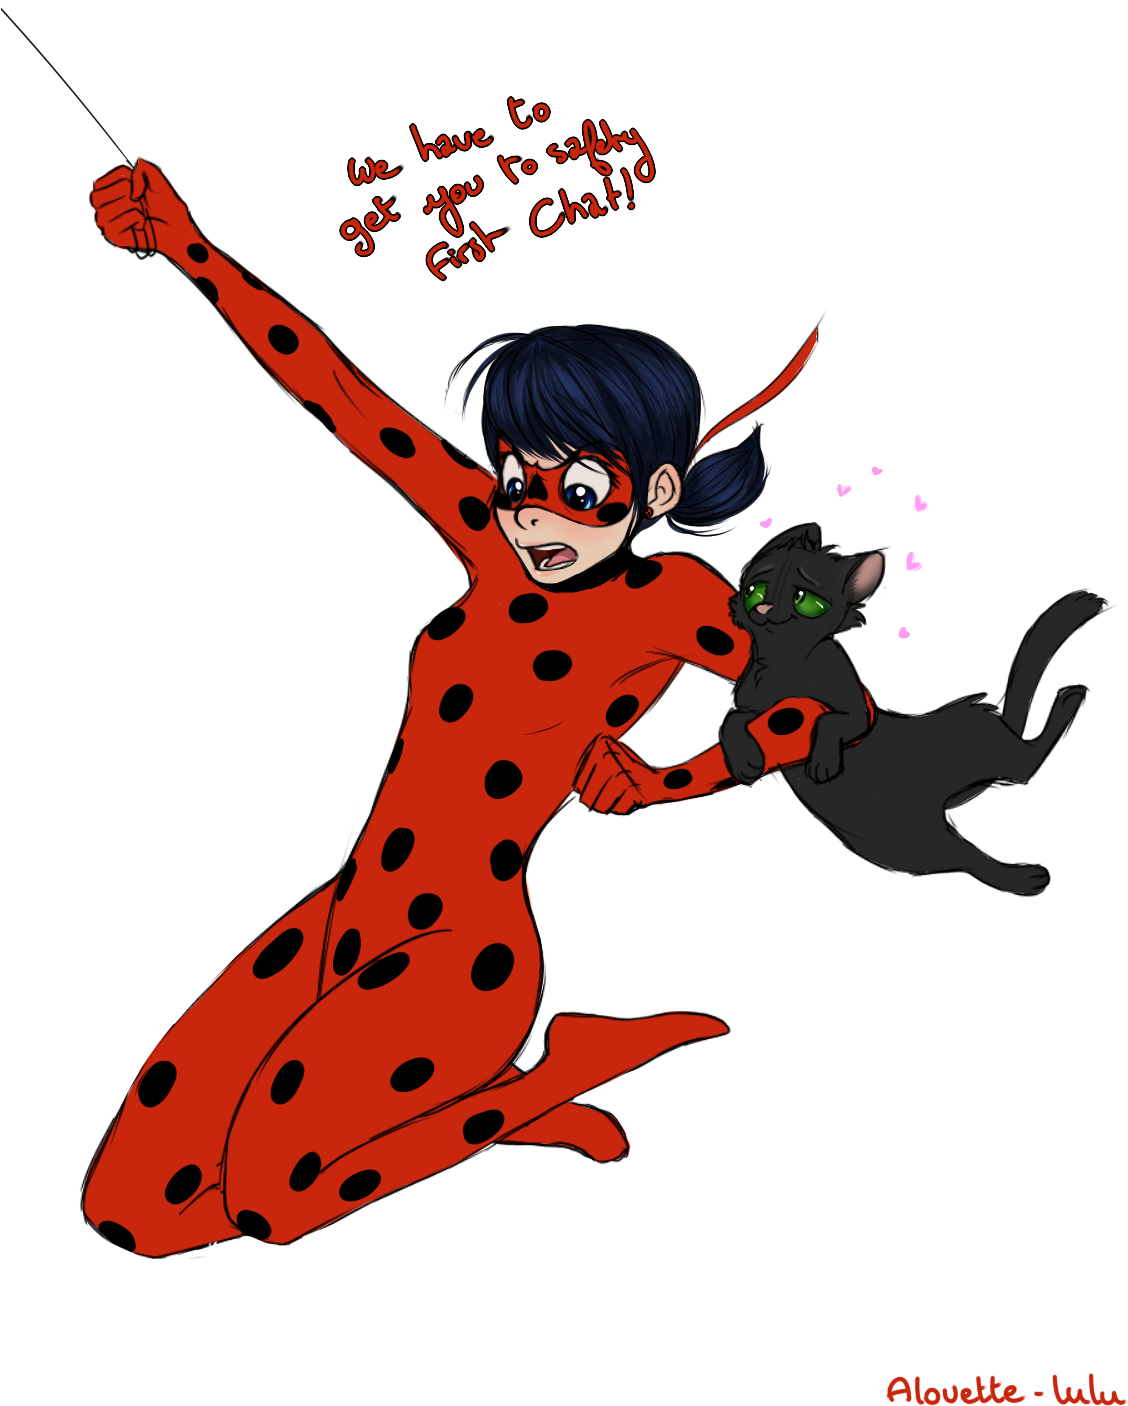 Smitten Kitten Miraculous Ladybug Know Your Meme - Area Codes 248 And 947 (1141x1500)